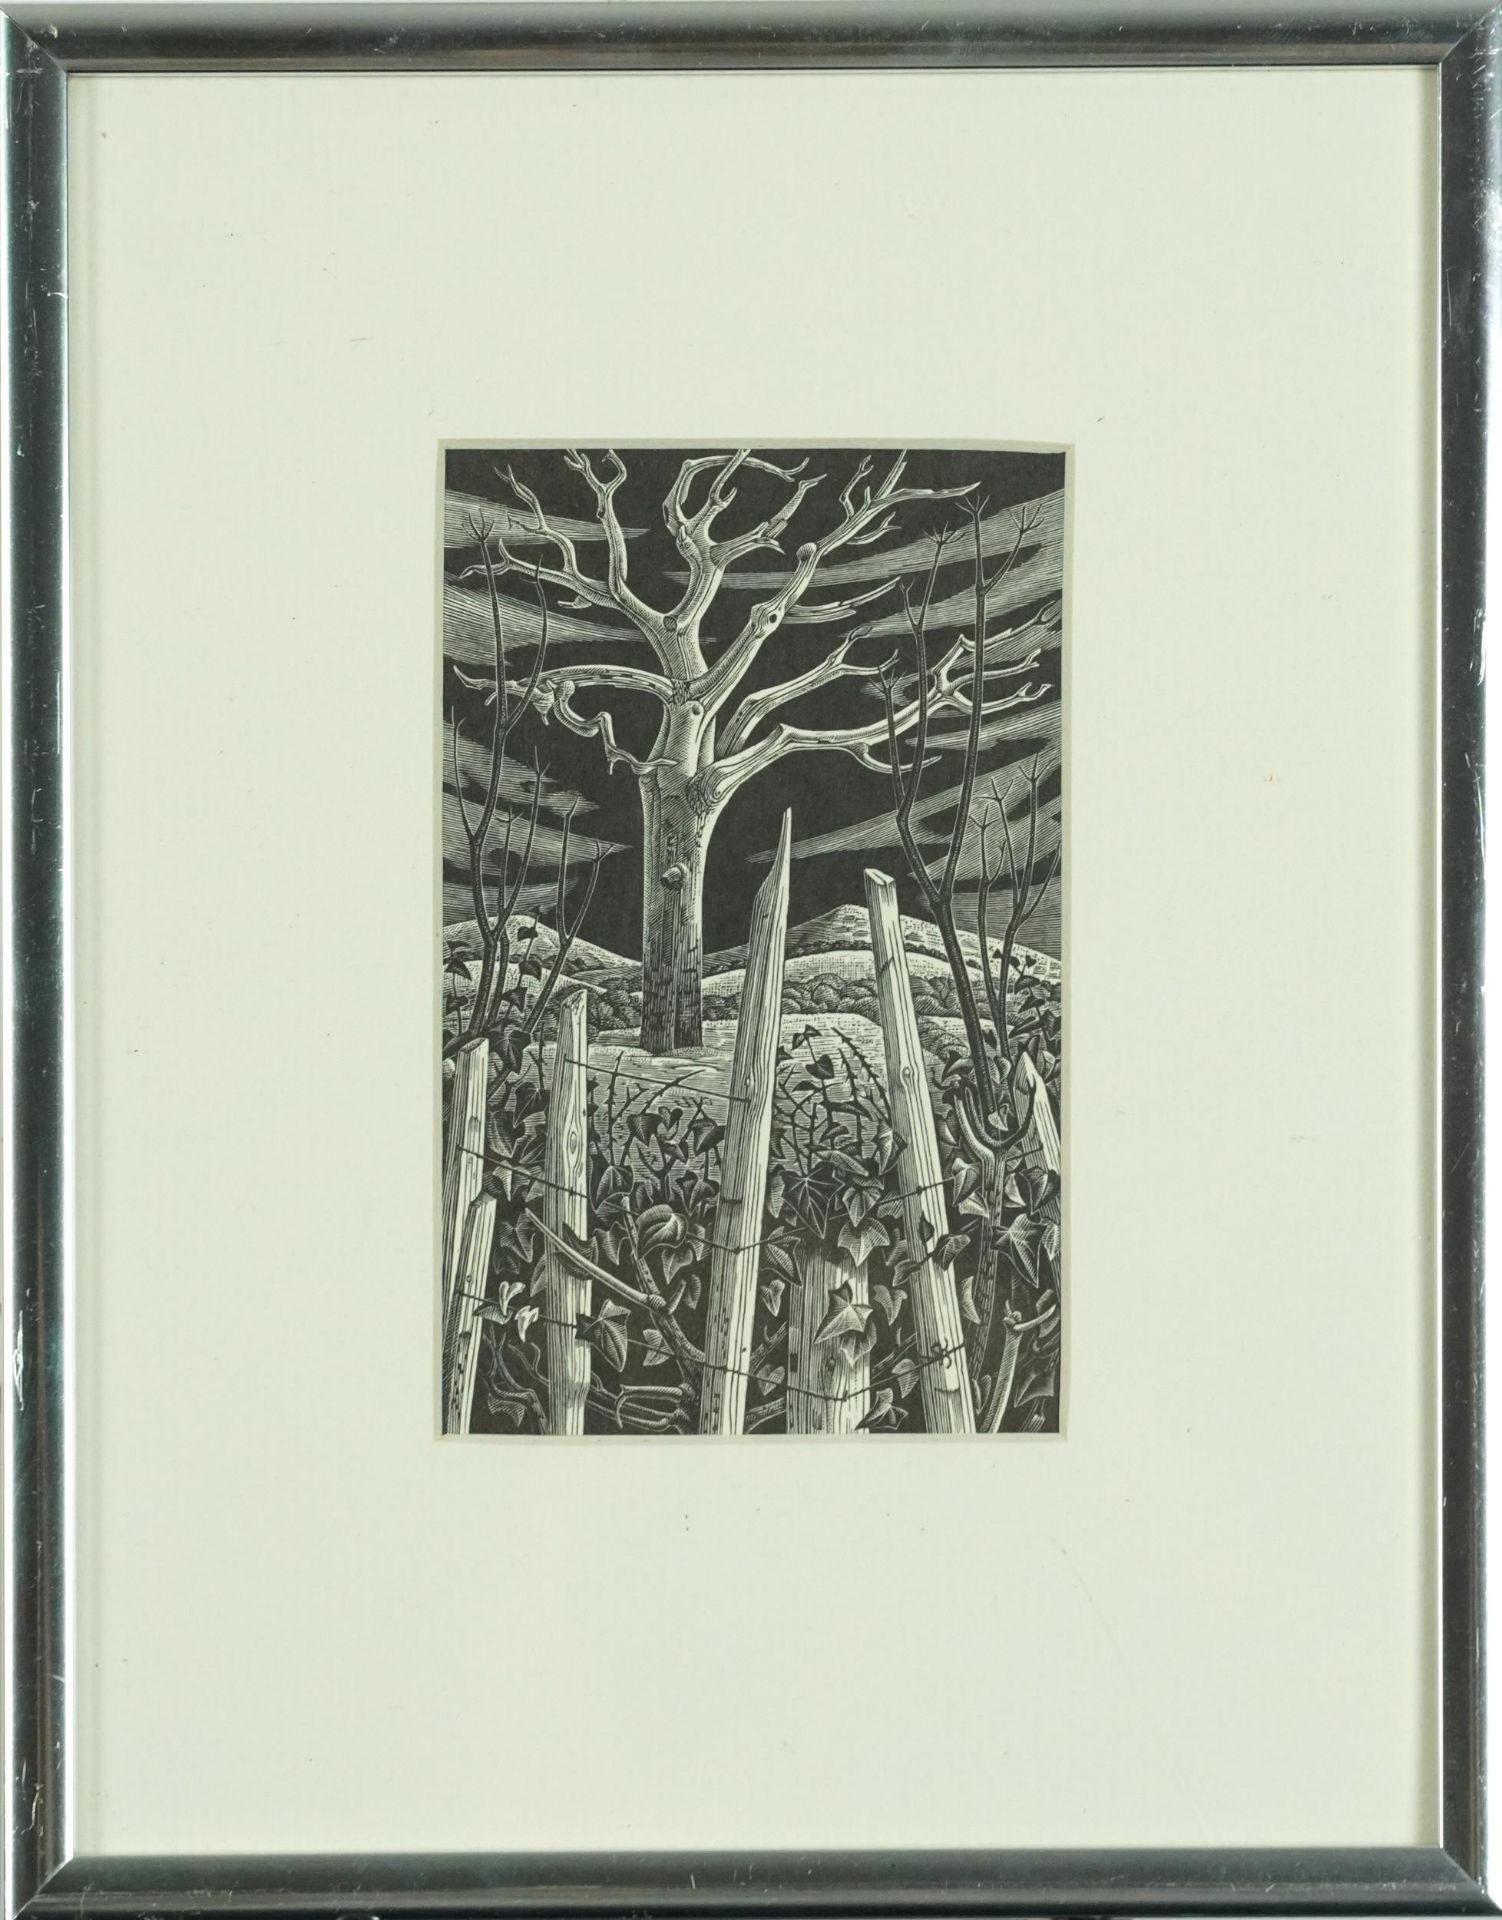 Monica Poole - Winter, wood engraving inscribed Florian Press 1983 verso, mounted, framed and - Image 2 of 4